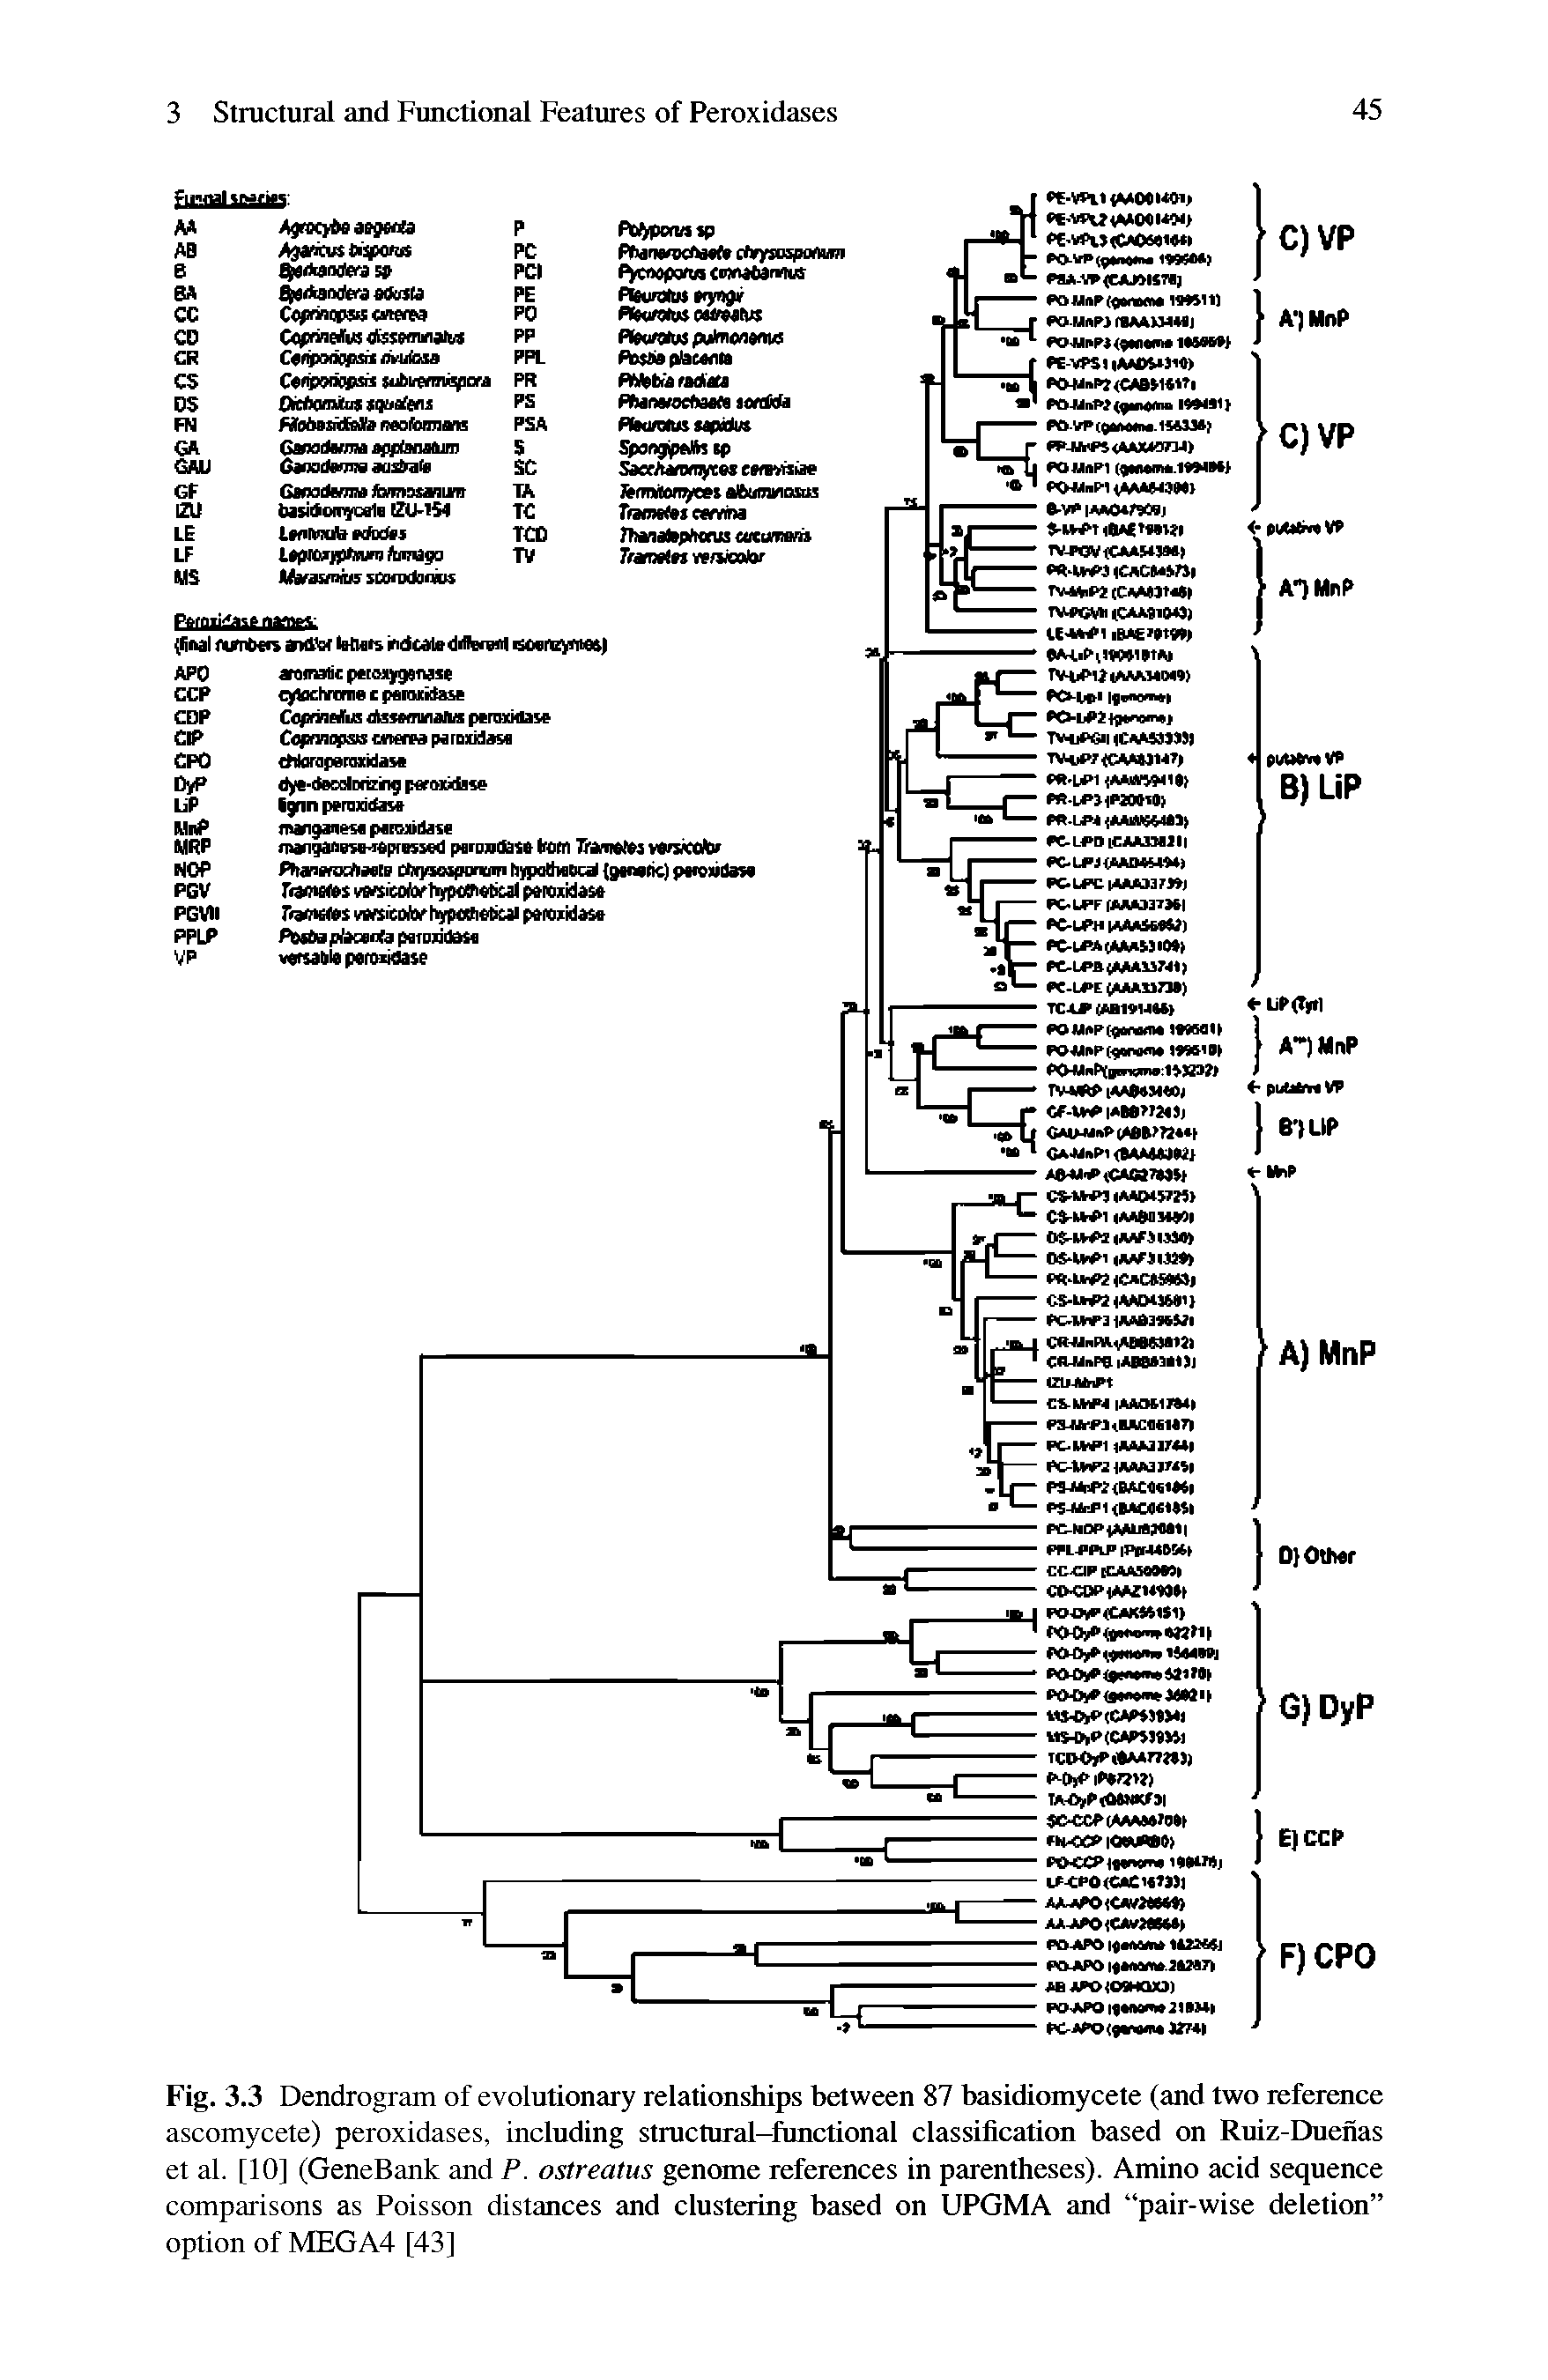 Fig. 3.3 Dendrogram of evolutionary relationships between 87 basidiomycete (and two reference ascomycete) peroxidases, including structural-functional classification based on Ruiz-Duenas et al. [10] (GeneBank and P. ostreatus genome references in parentheses). Amino acid sequence comparisons as Poisson distances and clustering based on UPGMA and pair-wise deletion option of MEGA4 [43]...